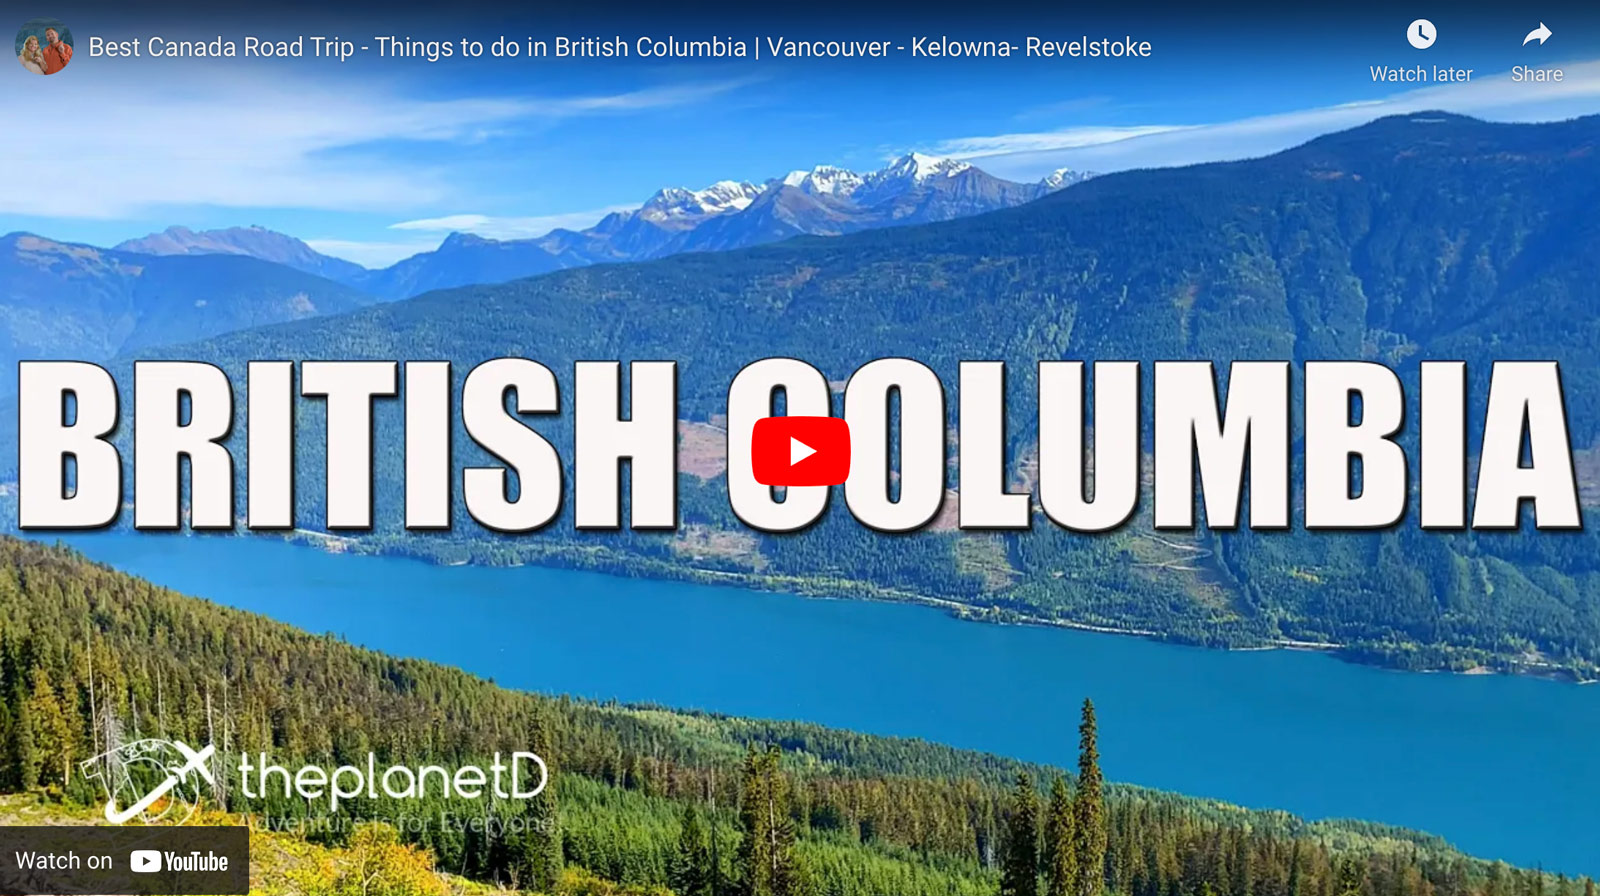 best british columbia road trip from Vancouver to Kelowna and Revelstoke to Kamloops